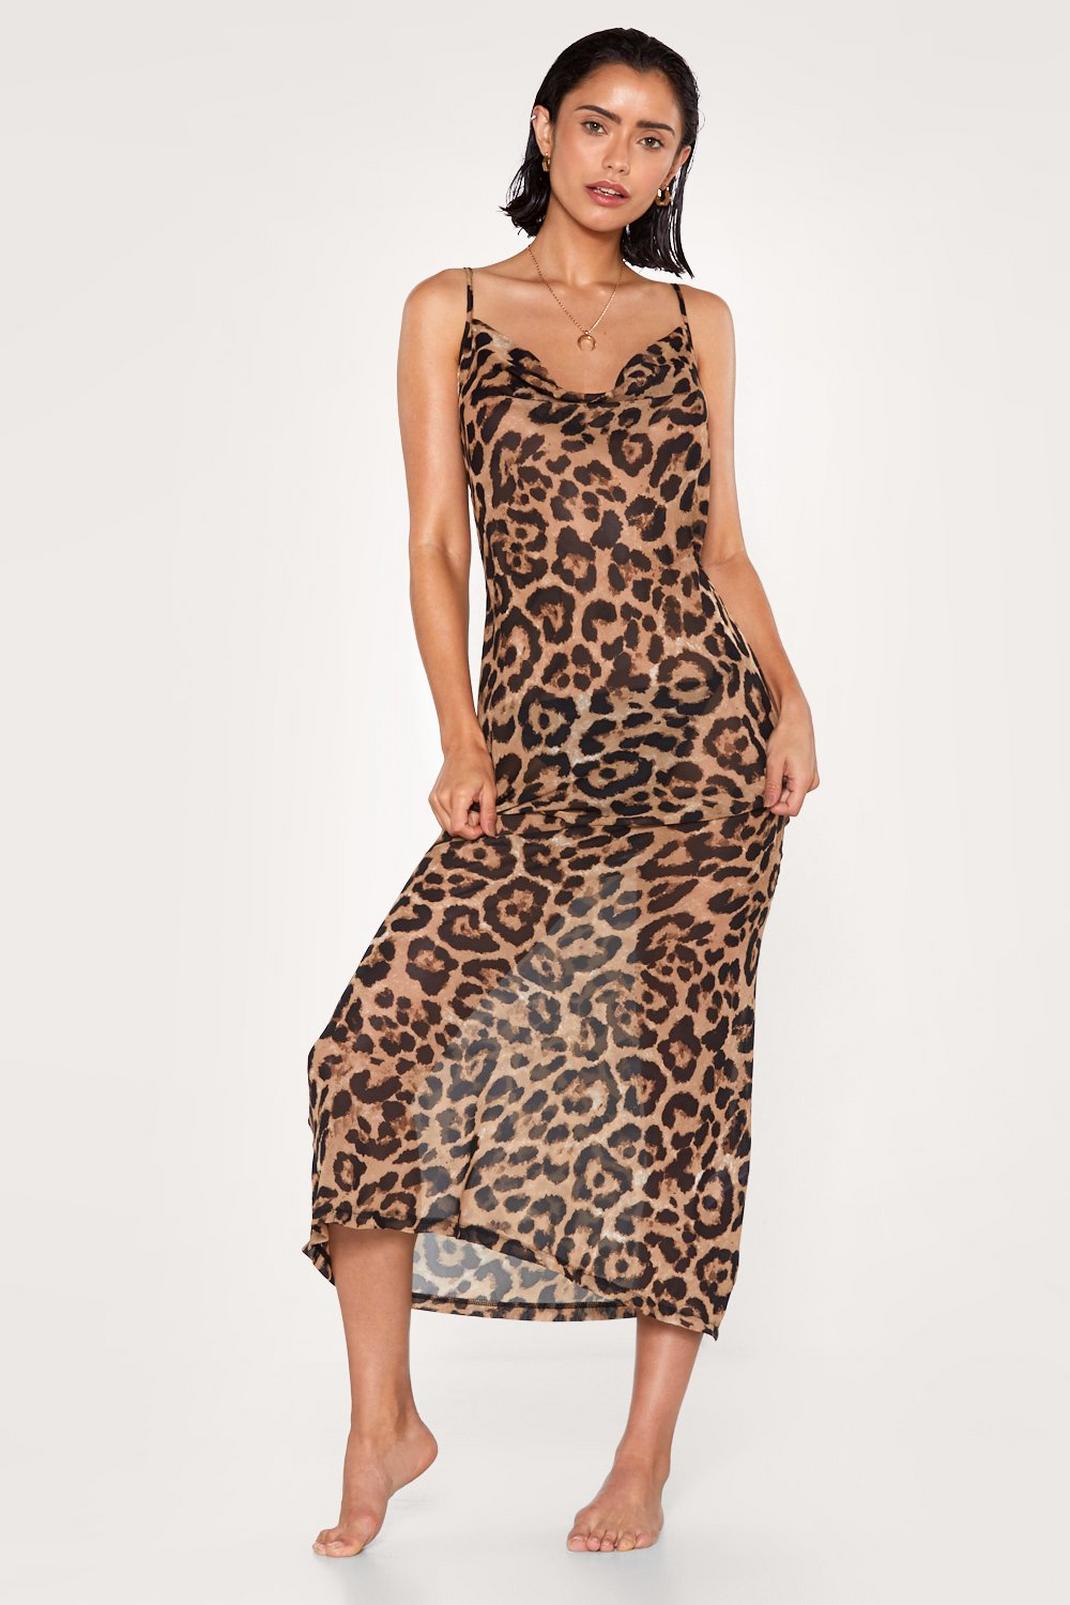 Brown Leopard Print Cowl Neck Beach Cover Up Dress image number 1